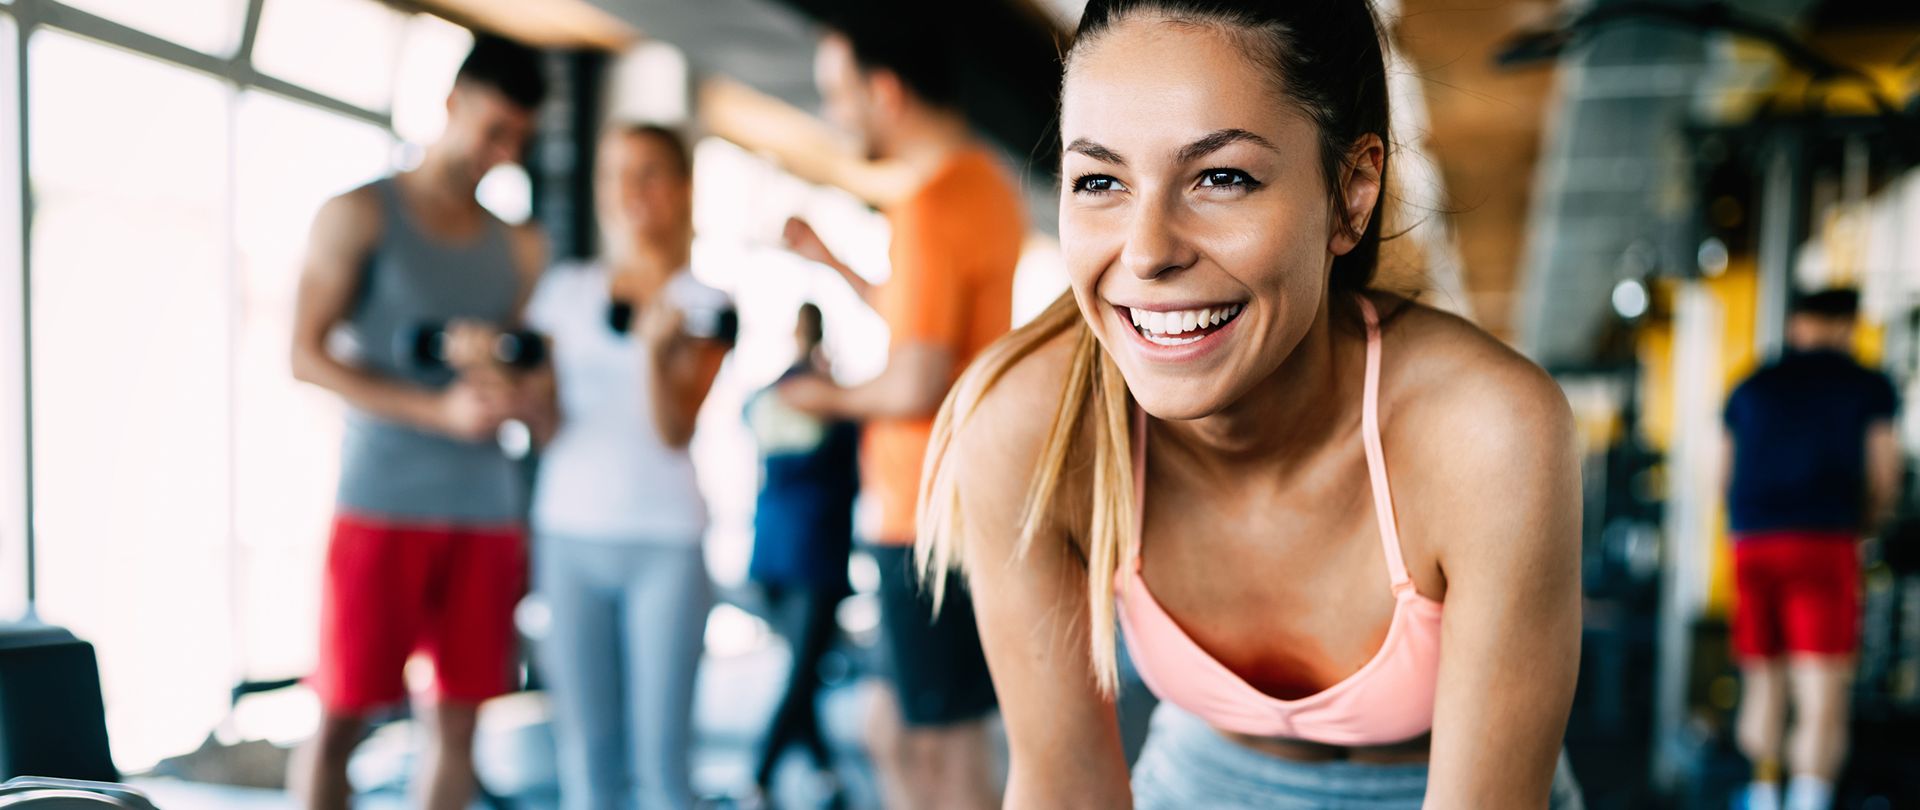 Active 31: Woman Smiling At Gym